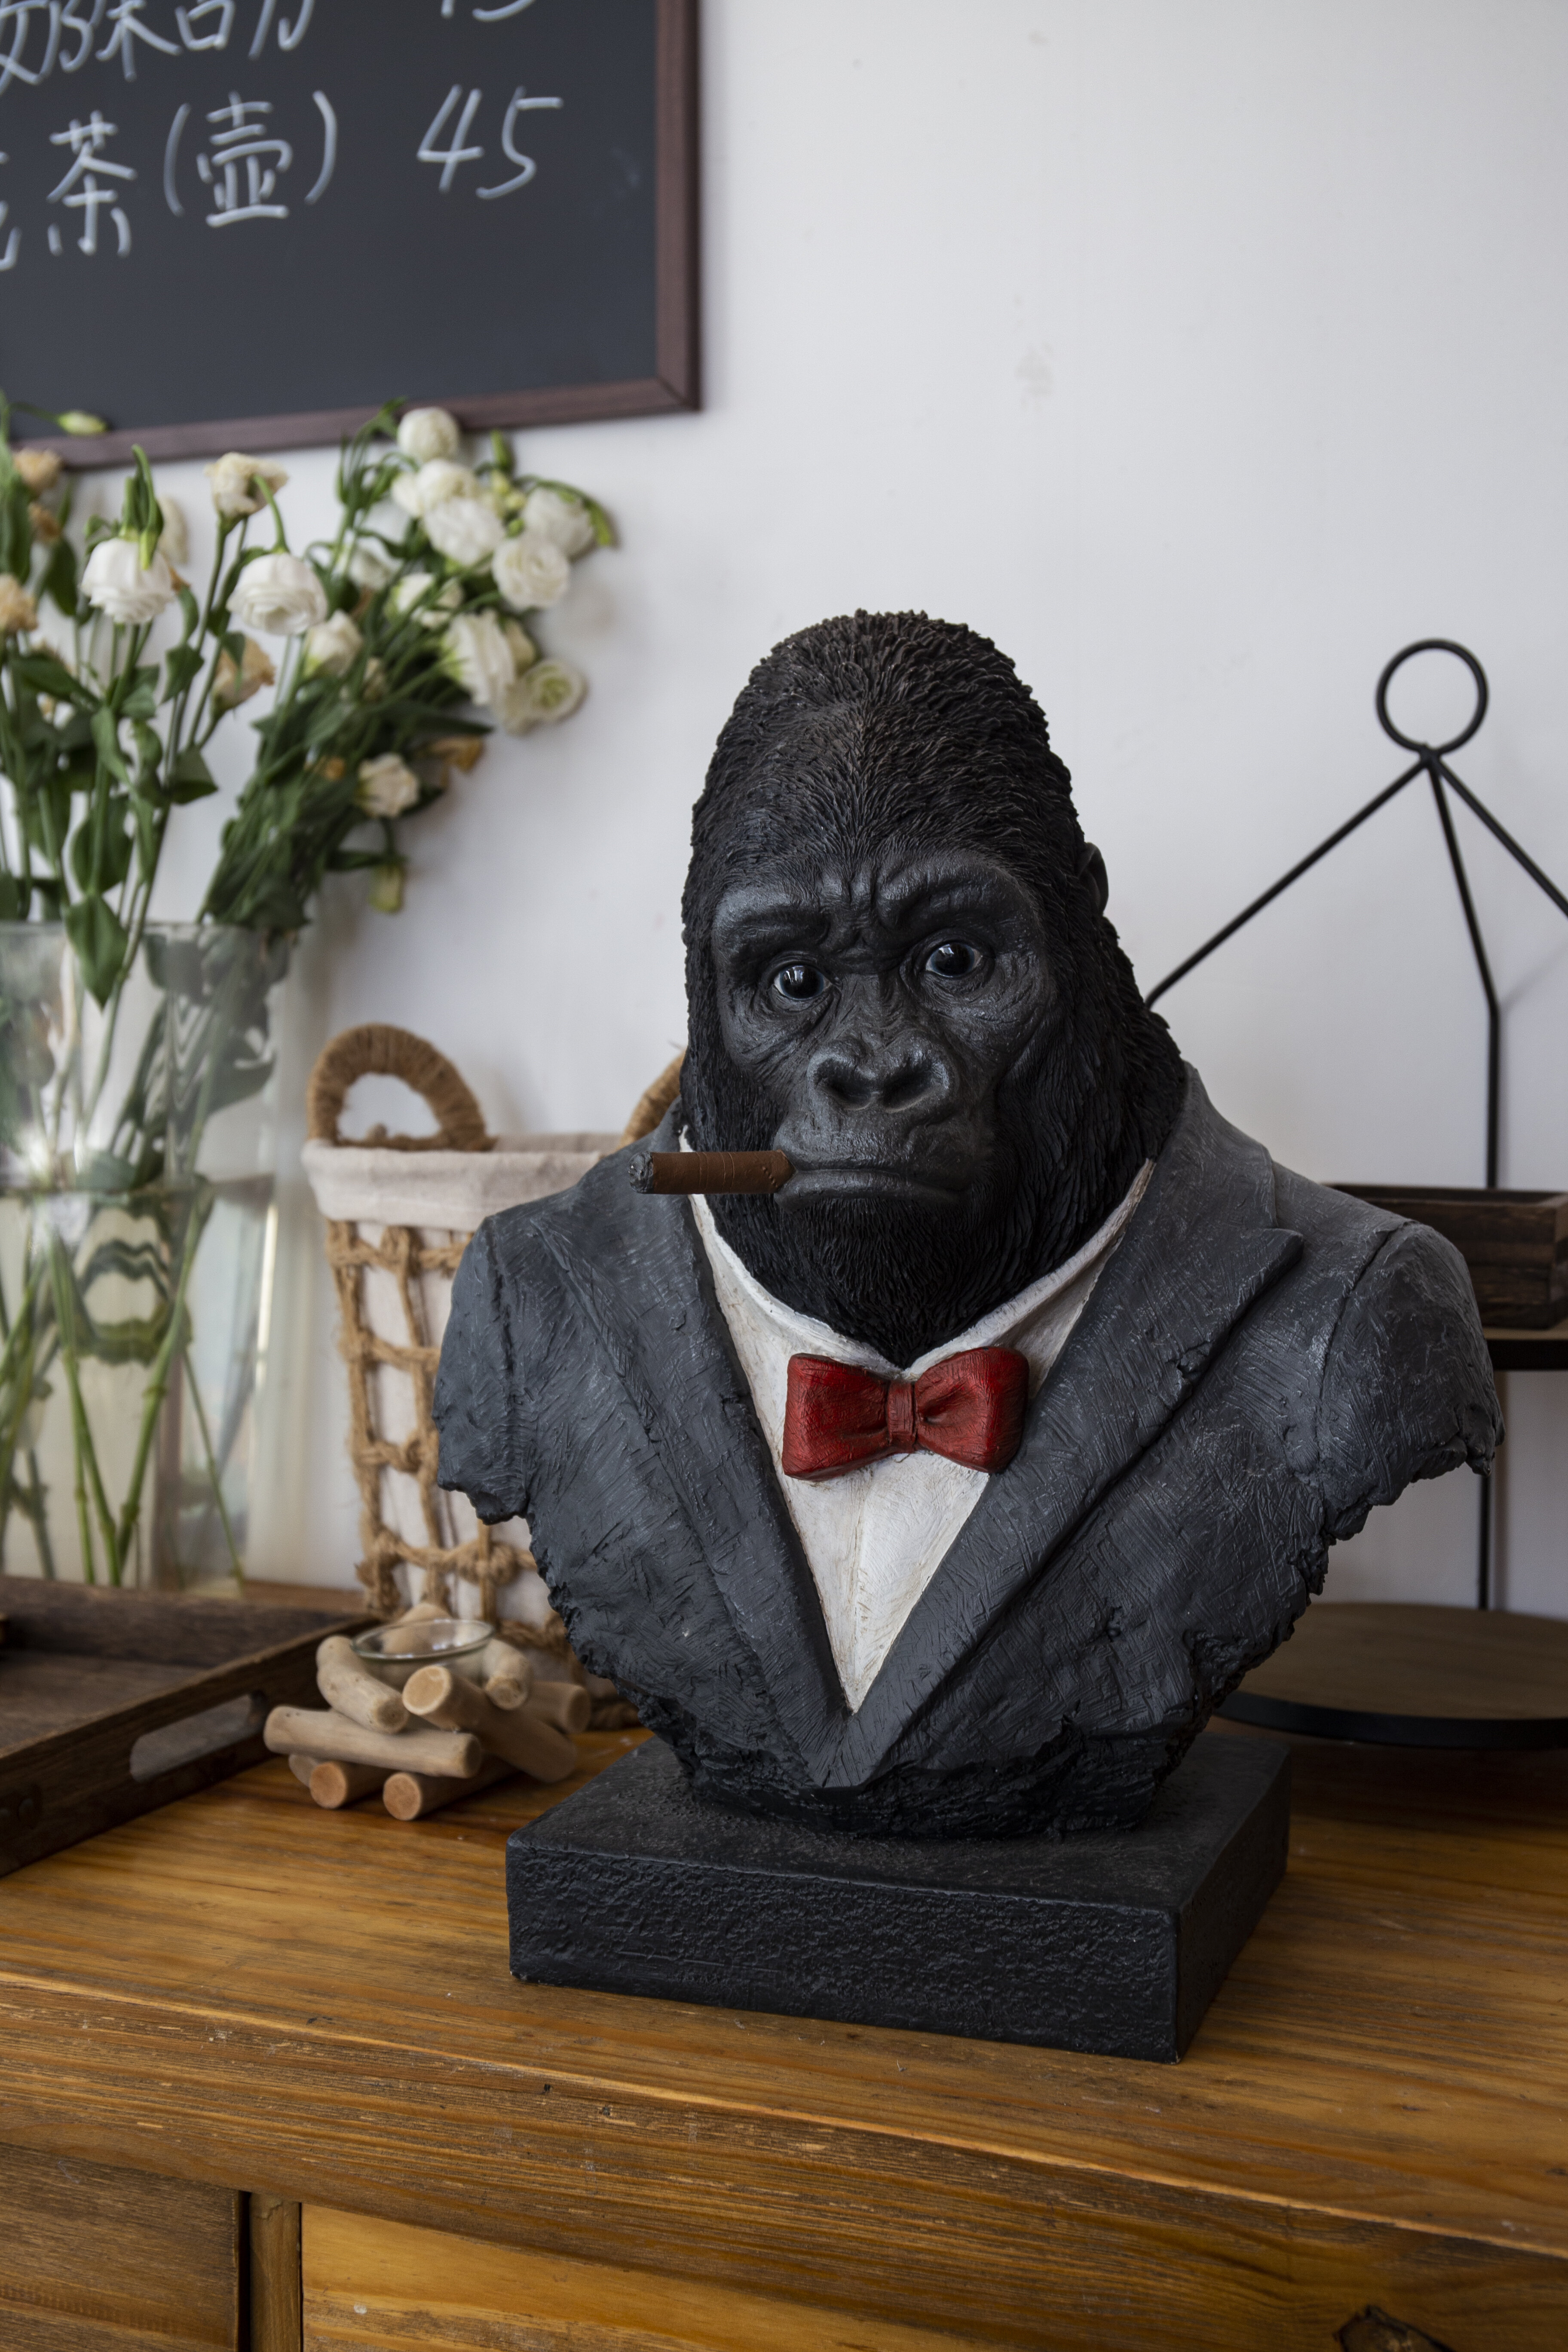 HI-LINE GIFT LTD. Gorilla Head with Tux Statues 87636-A - The Home Depot